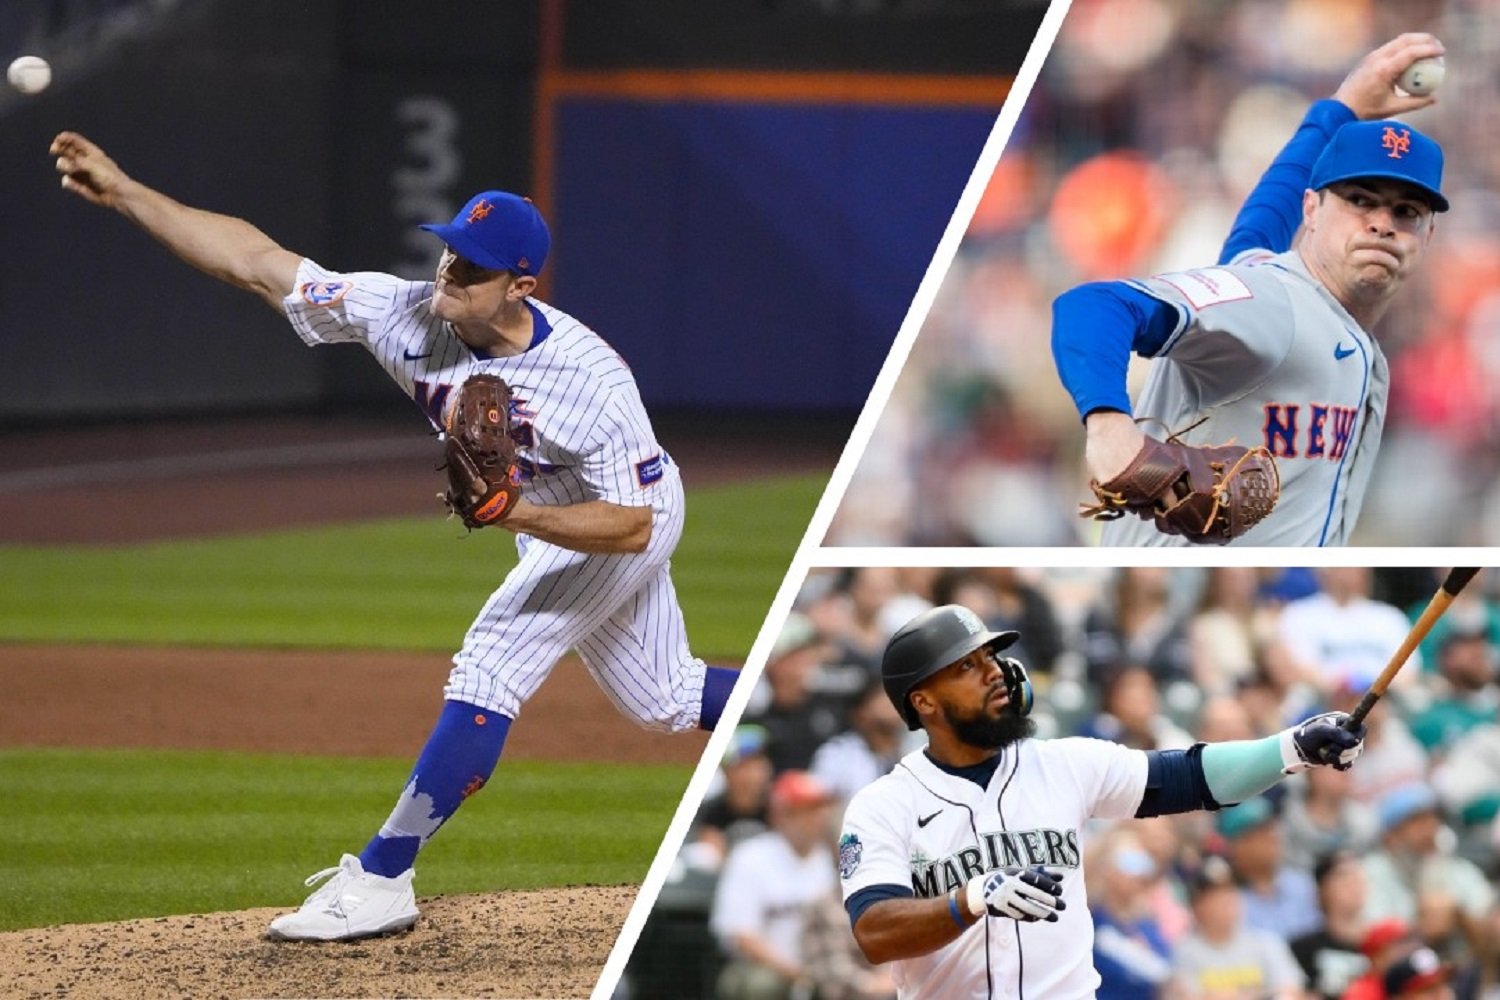 Why the New York Yankees Pulled the Plug on This Insane Trade